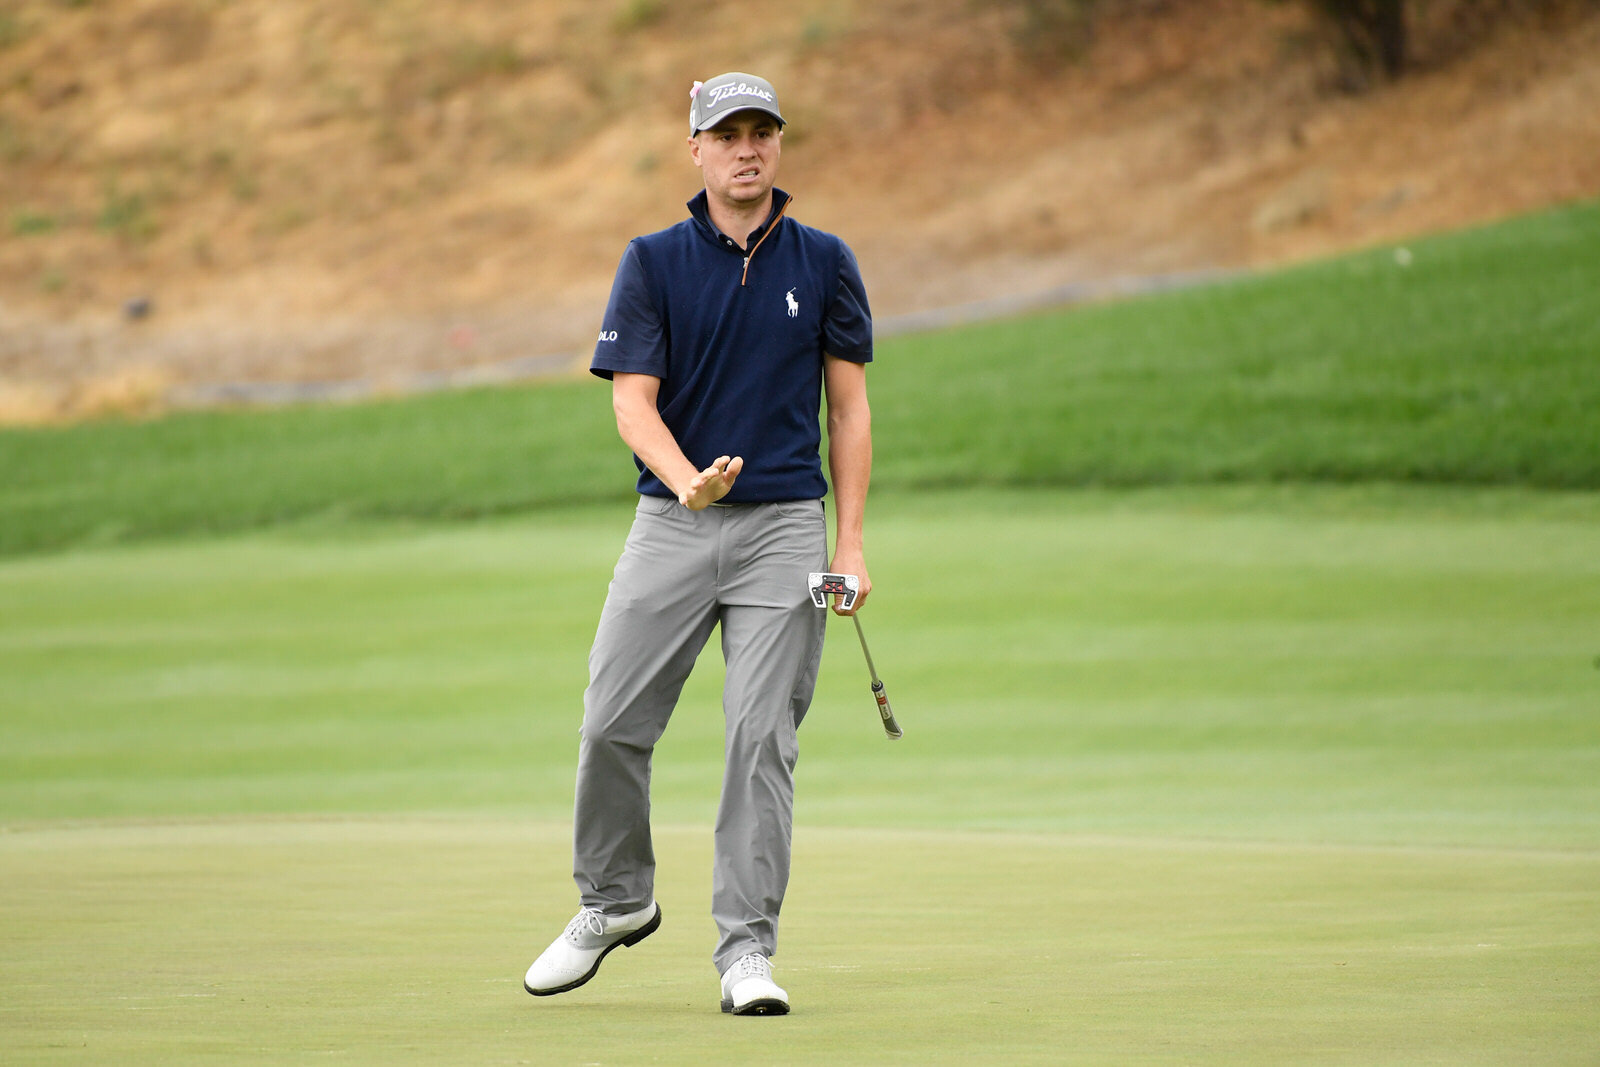  THOUSAND OAKS, CALIFORNIA - OCTOBER 25: Justin Thomas of the United States reacts to his putt on the eighth green during the final round of the Zozo Championship @ Sherwood on October 25, 2020 in Thousand Oaks, California. (Photo by Harry How/Getty 